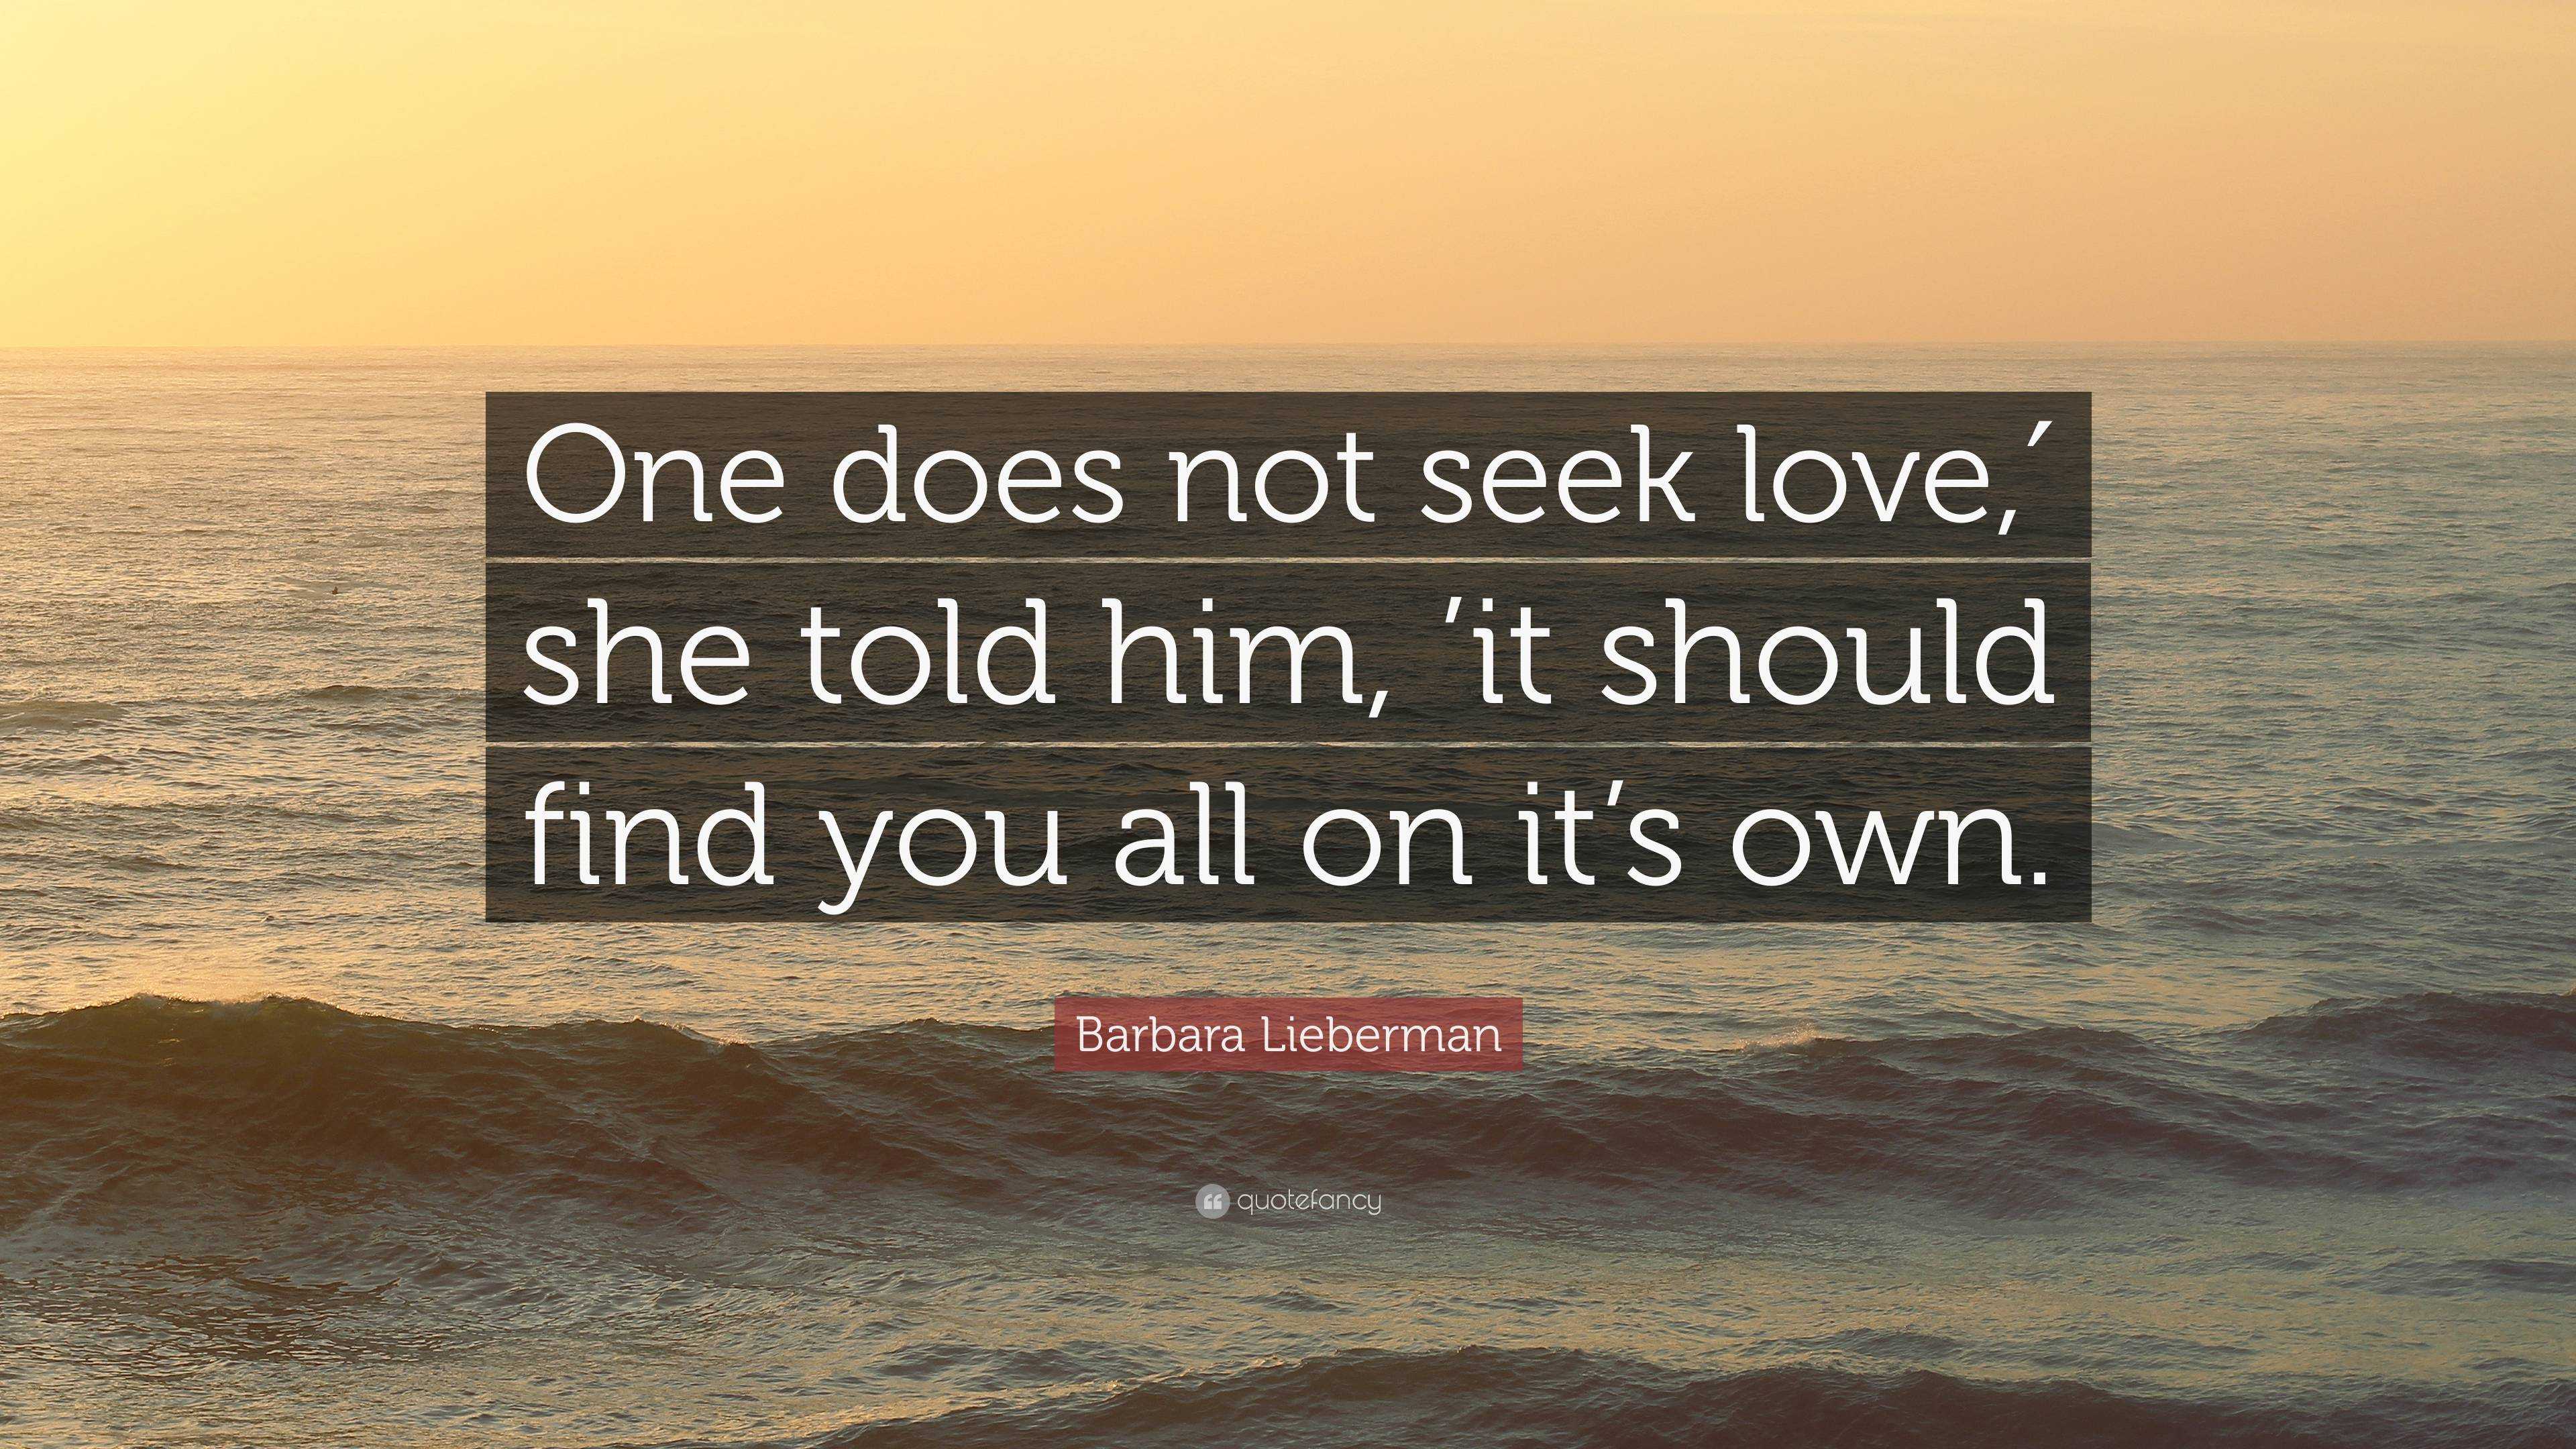 Barbara Lieberman Quote: “One does not seek love,′ she told him, ’it ...